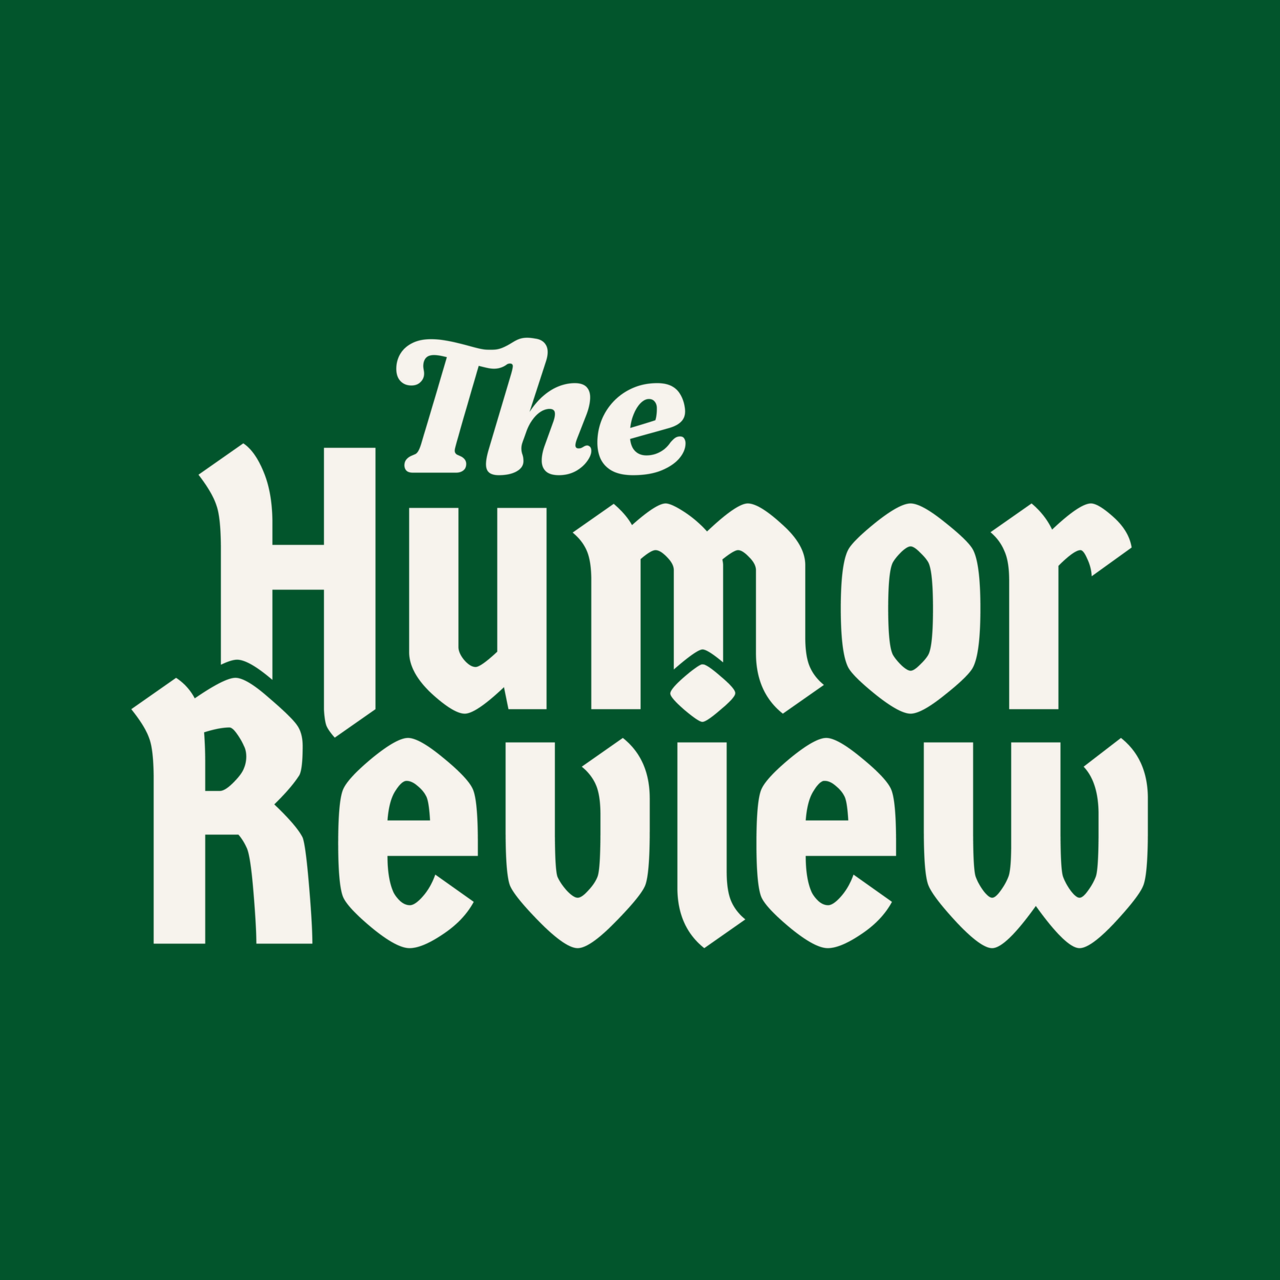 The Humor Review